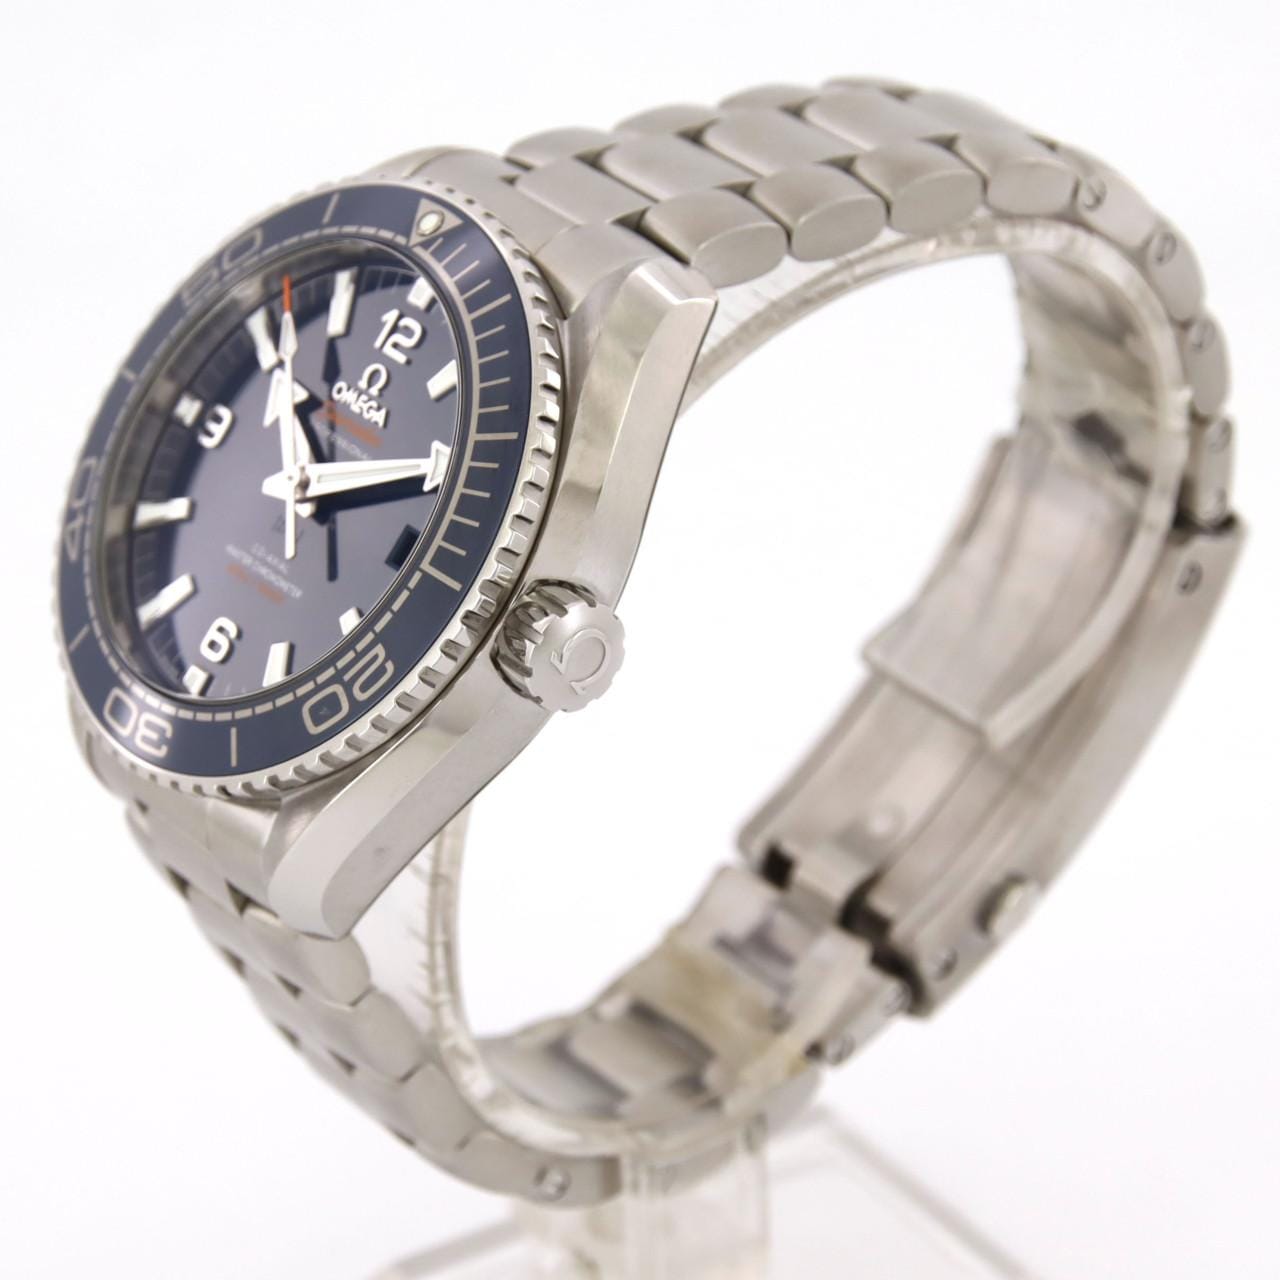 Omega Seamaster Planet Ocean 215.30.44.21.03.001 SS Automatic